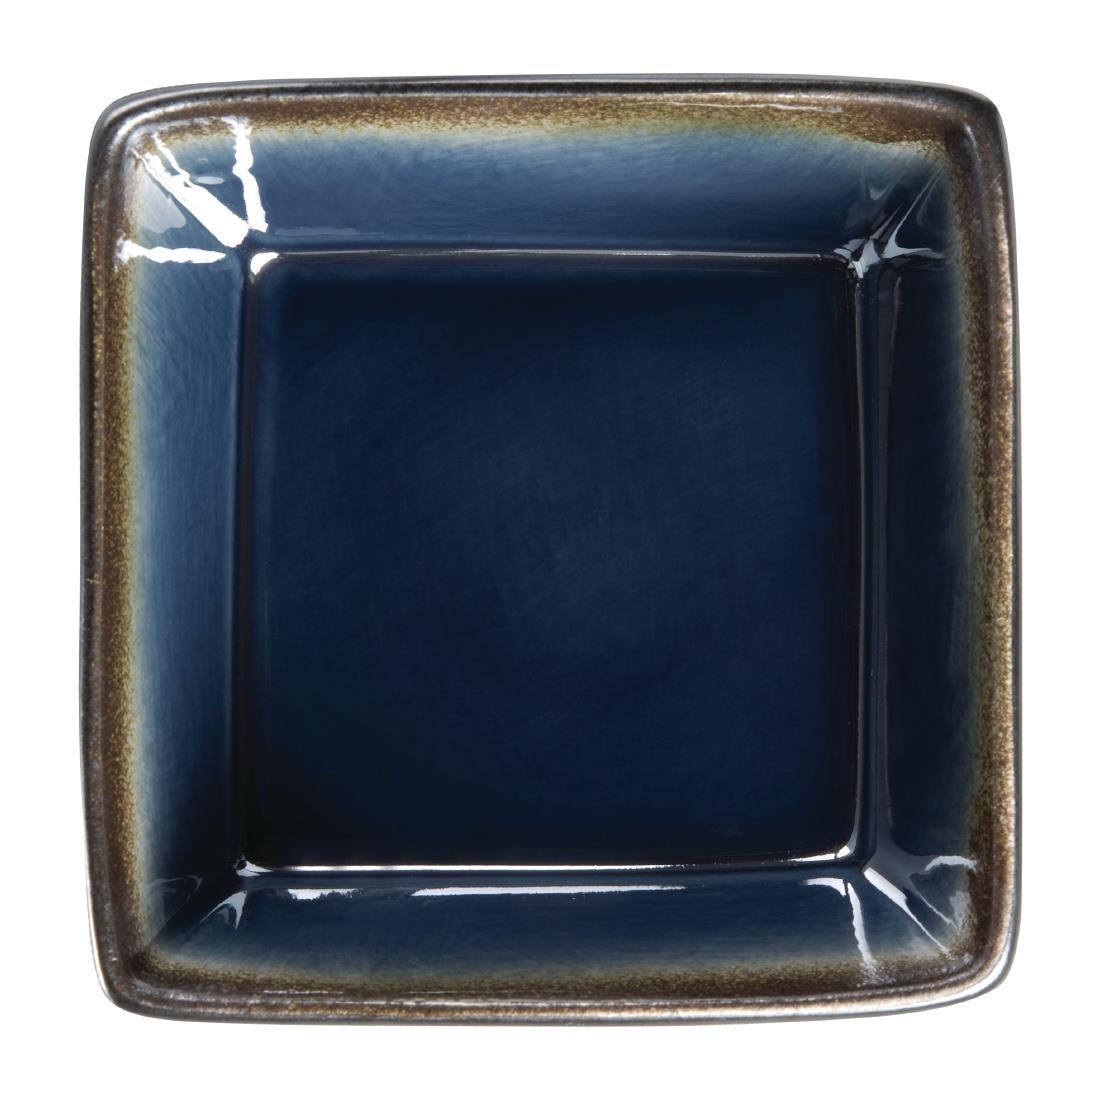 Olympia Nomi Square Bowl Blue 110mm (Pack of 6) - HC337  - 1